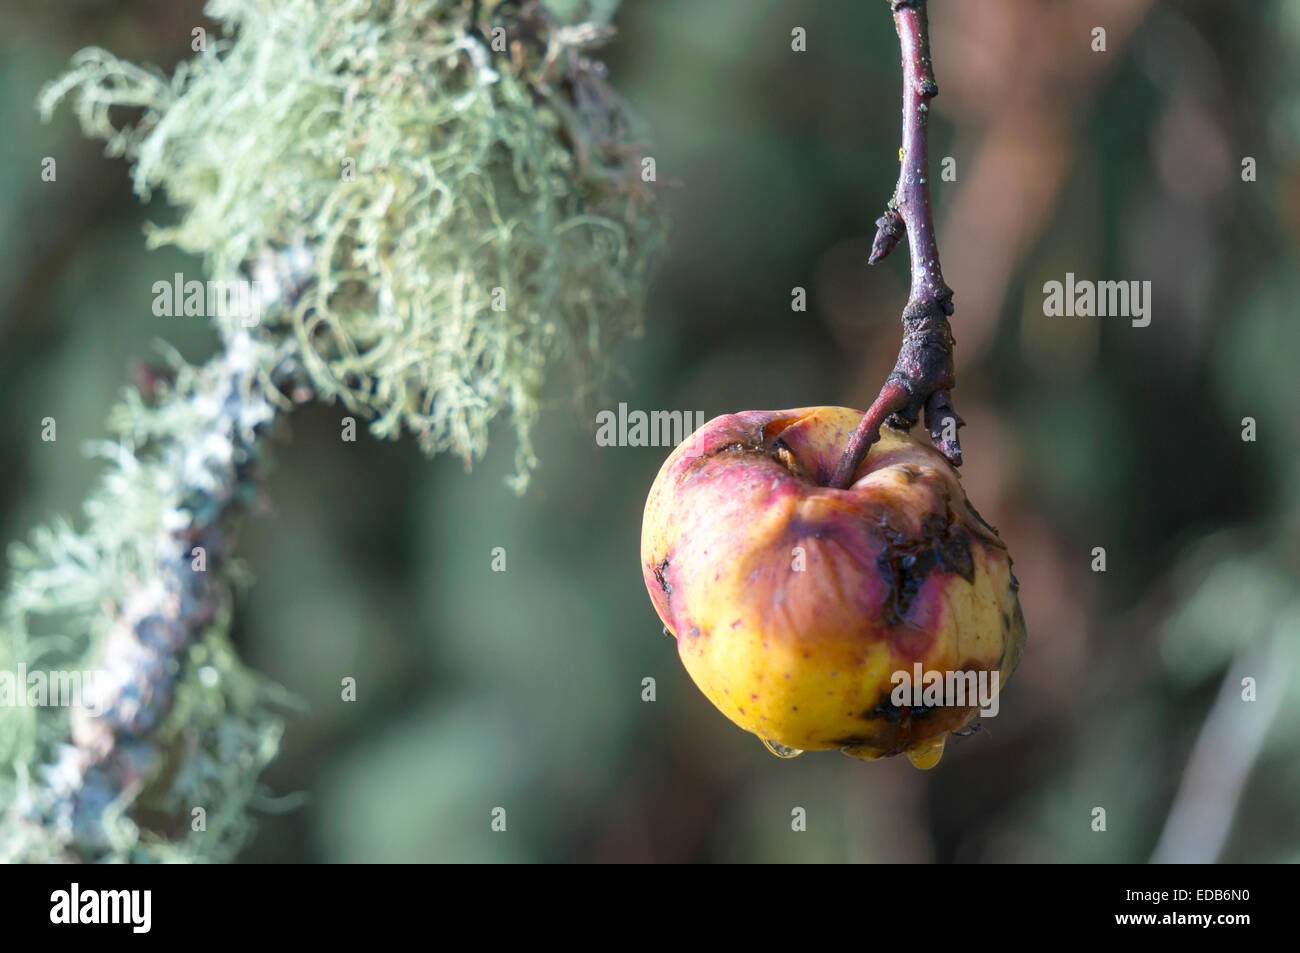 Yellow heirloom apples rotting on the tree after winter freeze in Corvallis, Oregon, USA. Stock Photo